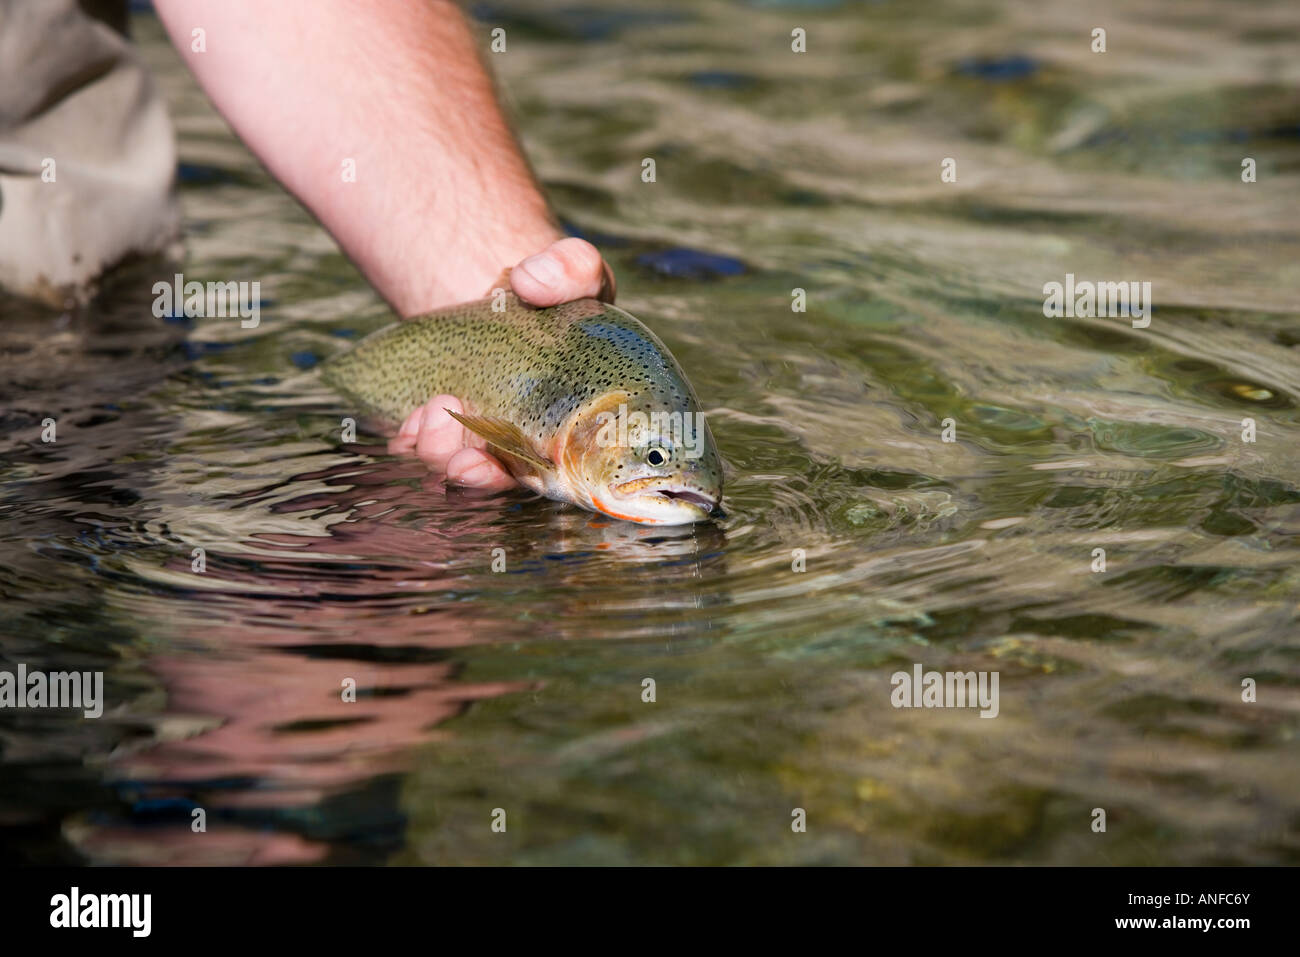 Fly-fishing guide, releases cutthroat trout on tributary of Elk River near Fernie, British Columbia, Canada. Stock Photo